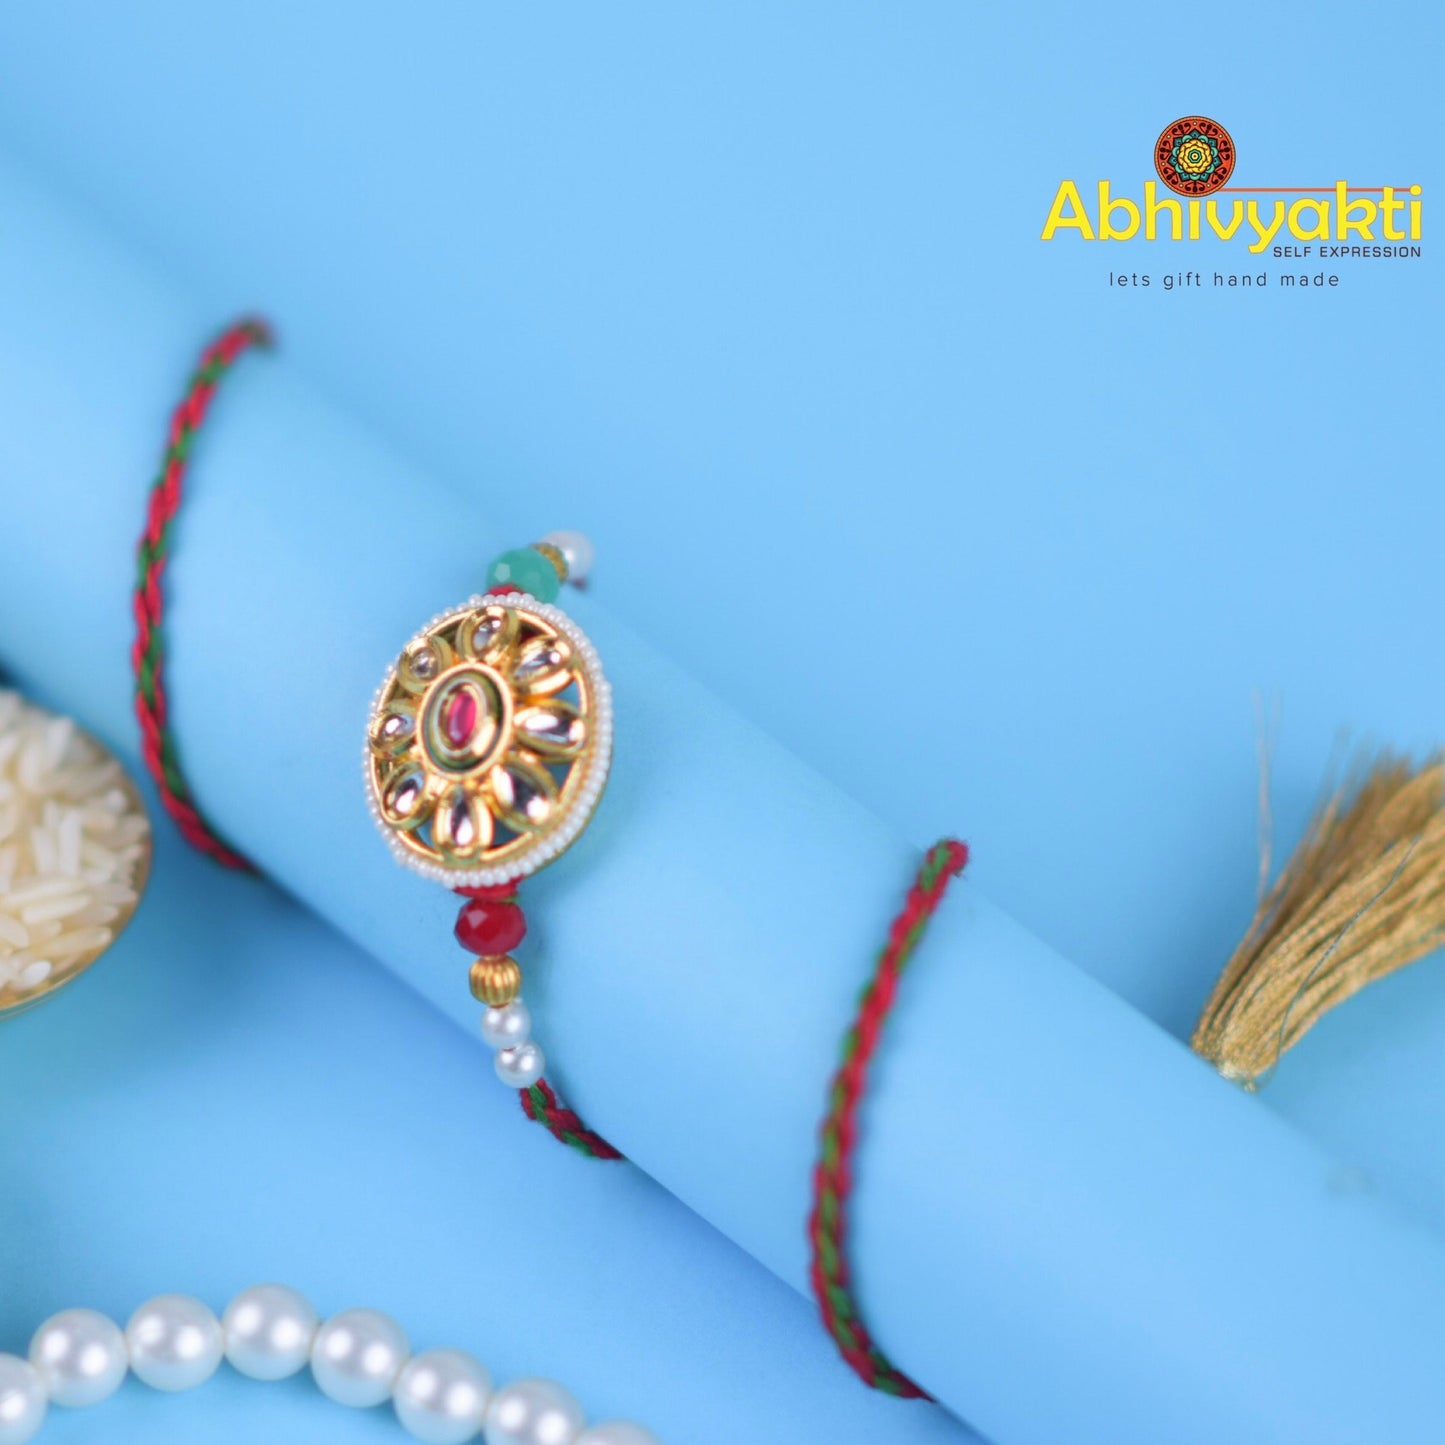 Elegant gold and red rakhi bracelet adorned with pearl, stone, and beads.